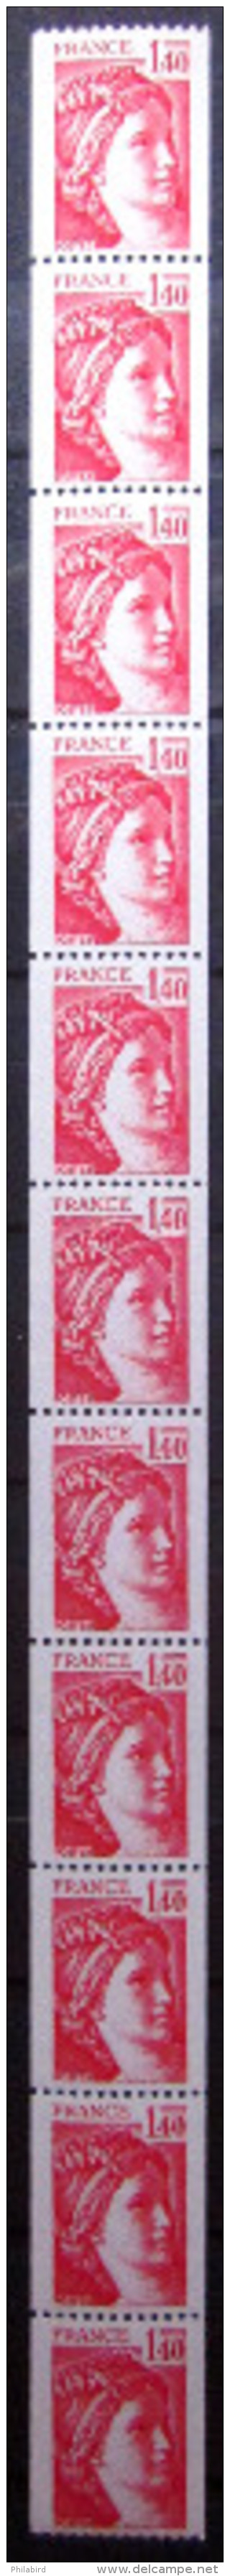 FRANCE            ROULETTE  76  (11 Timbres)            NEUF** - Roulettes